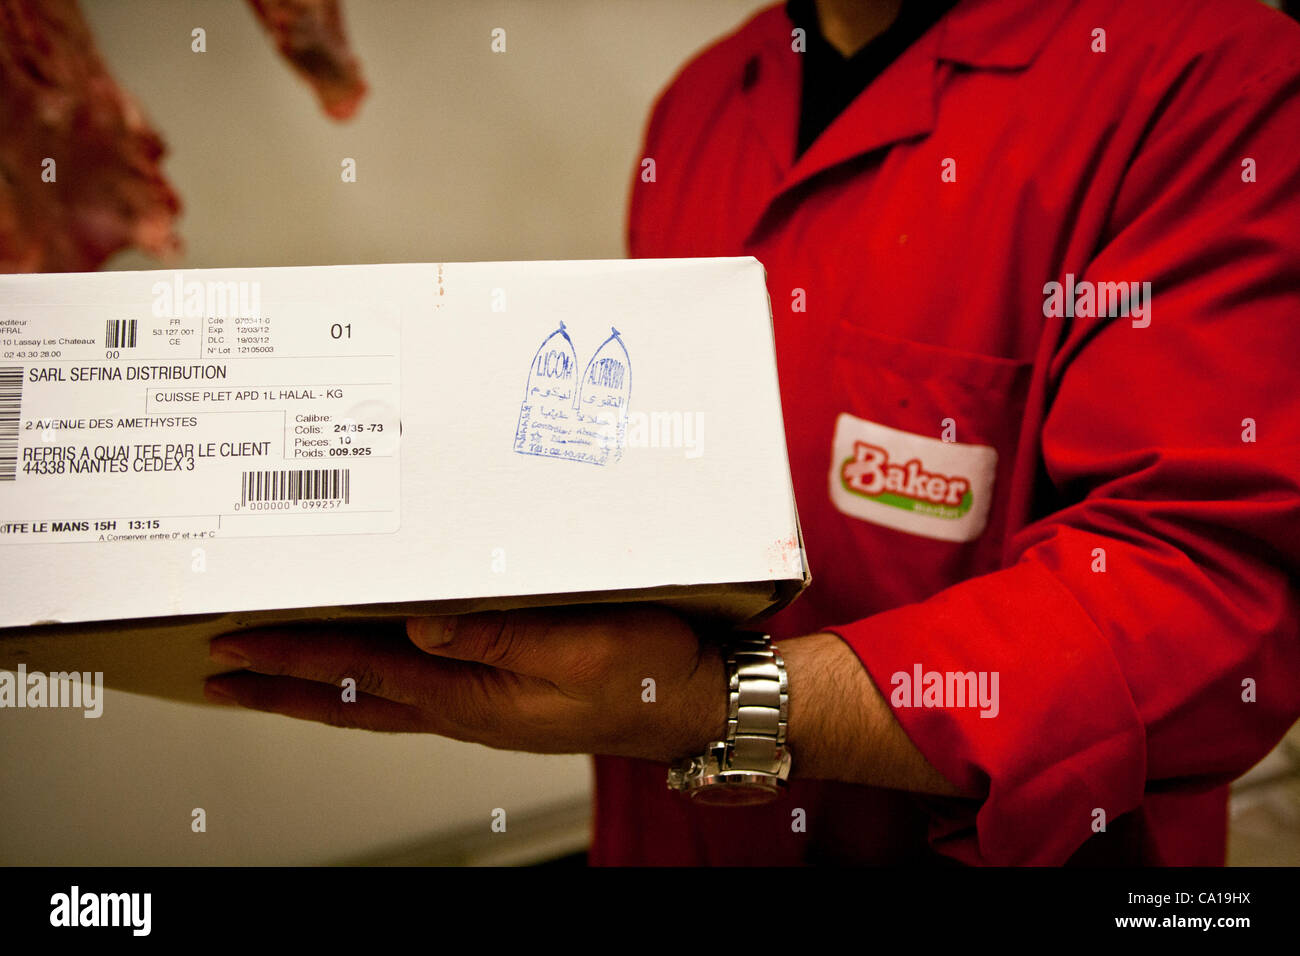 A butcher shows a stamp showing that a box of meat products is Halal, at a Halal supermarket in Nantes, France, 17 March 2012 Stock Photo